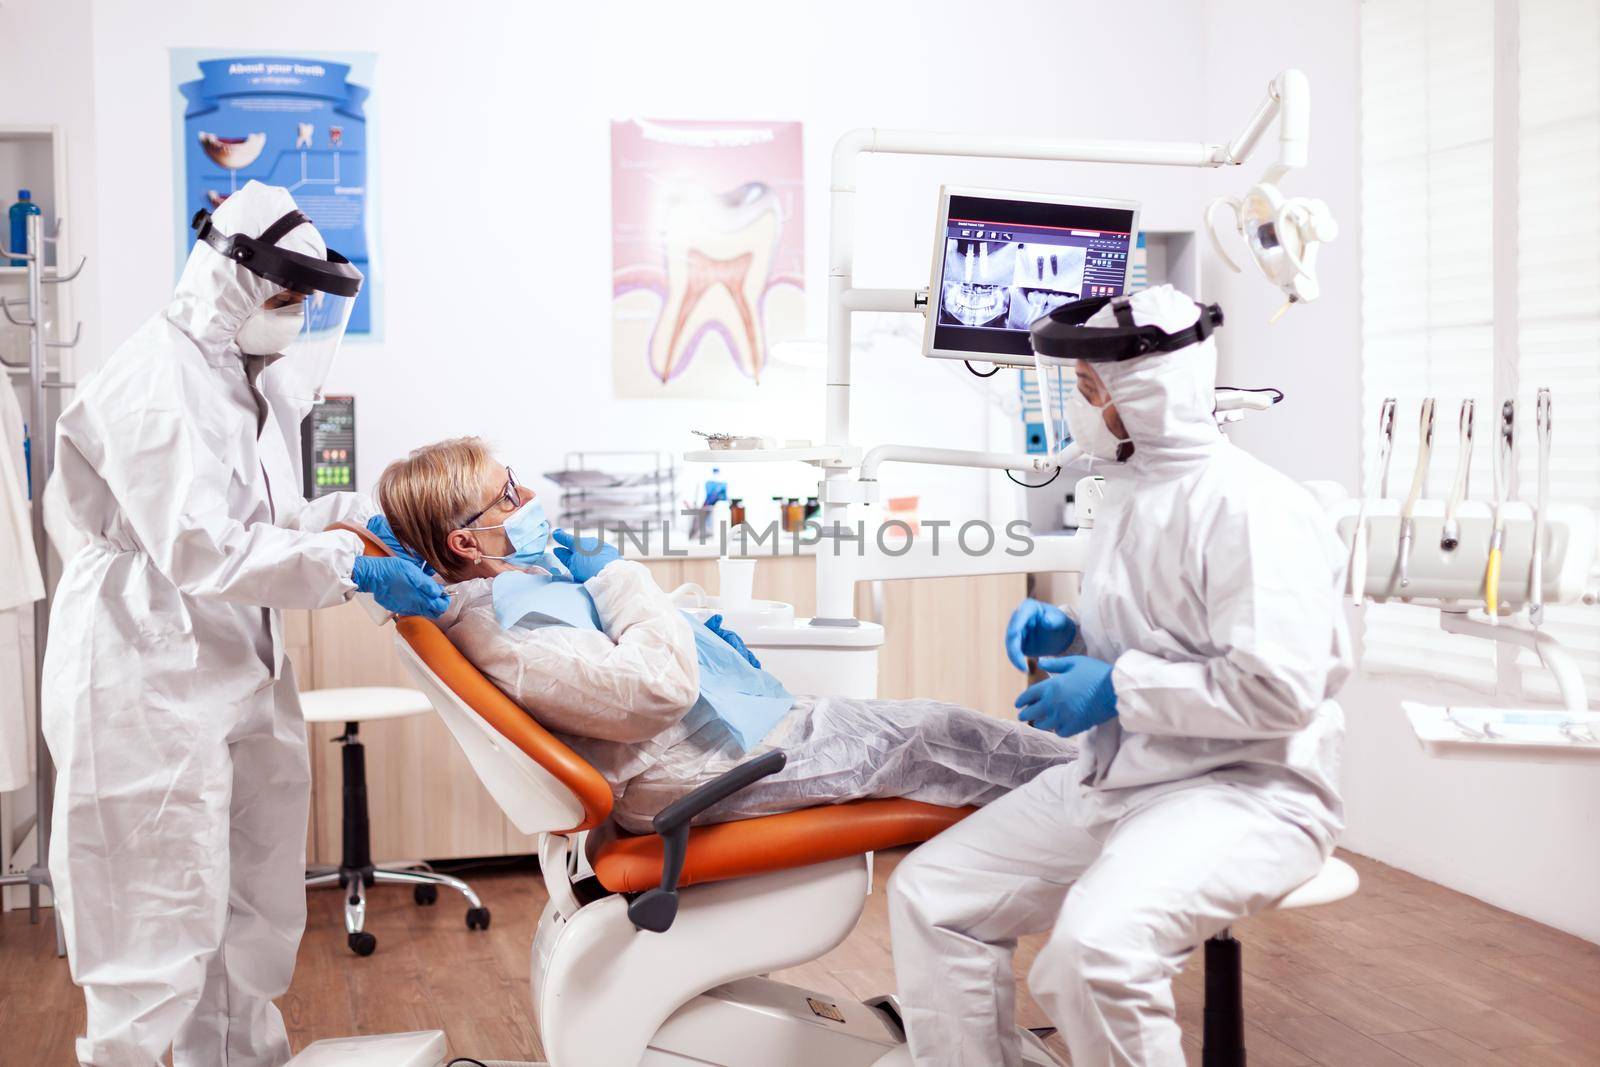 Dentist wearing equipment agasint coronavirus dicussing about teeth hygiene with senior patient. Elderly woman in protective uniform during medical examination in dental clinic.